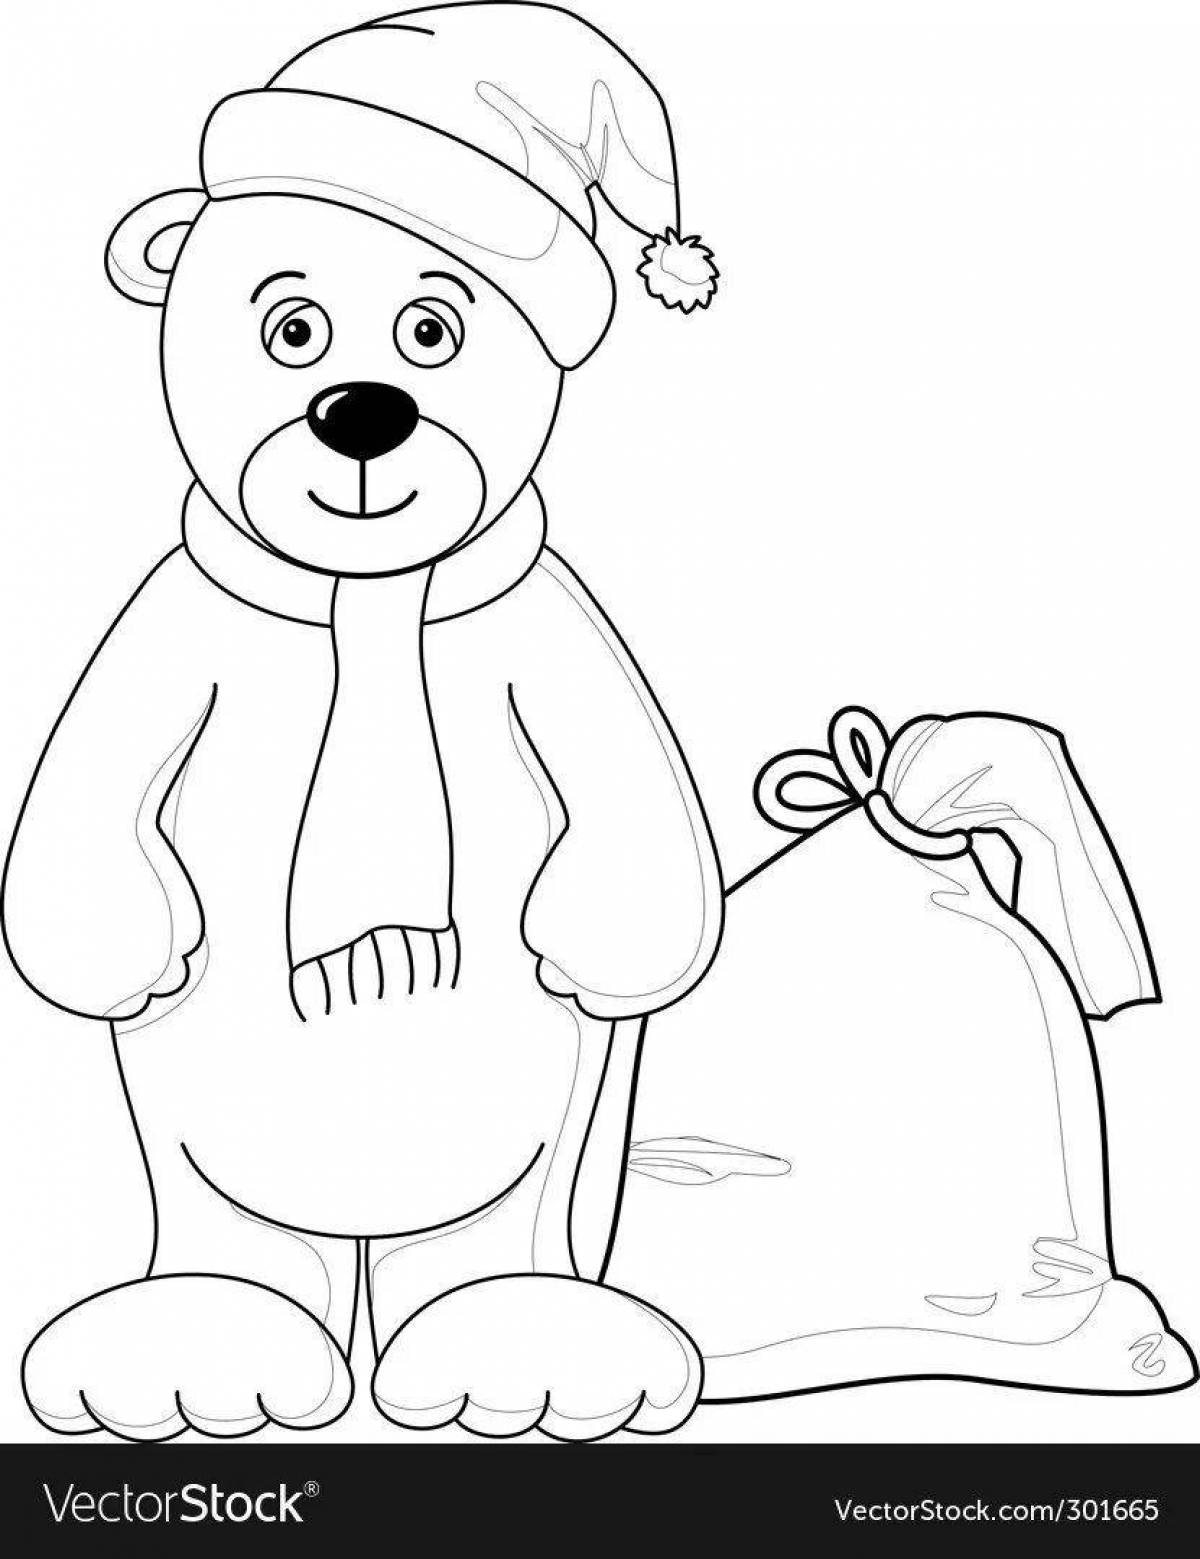 Coloring of a playful christmas bear